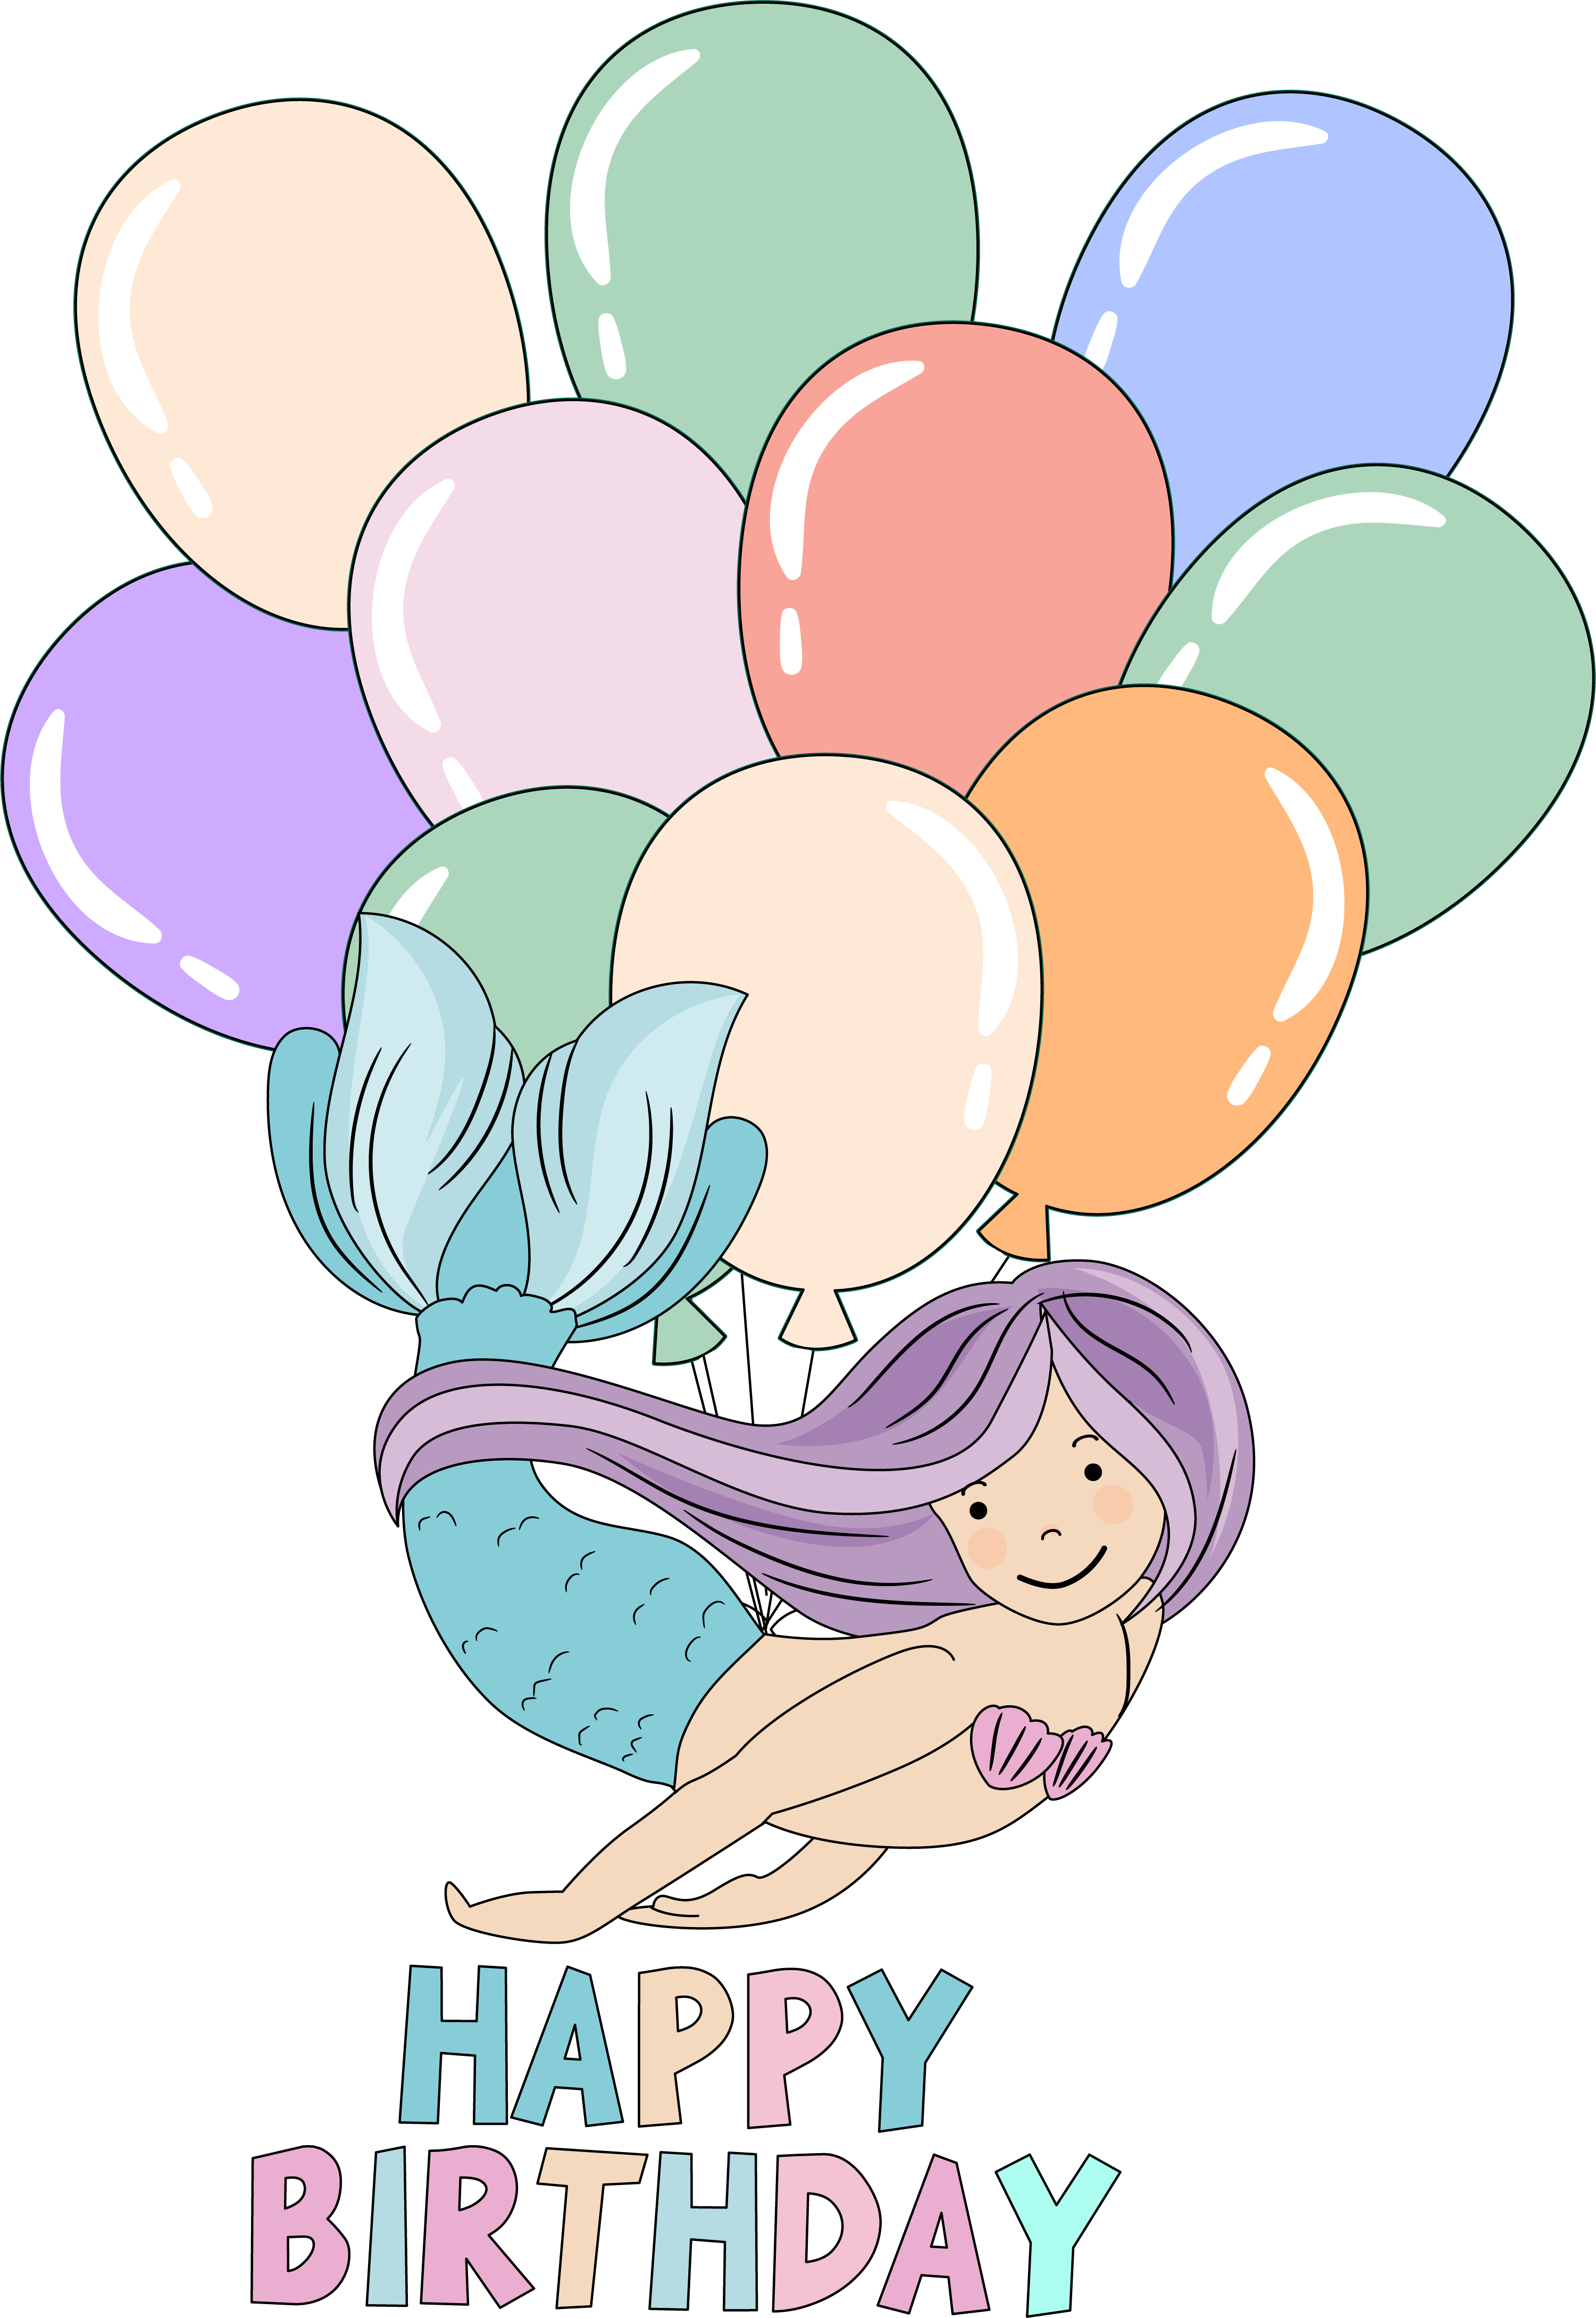 A wonderful mermaid with balloons.